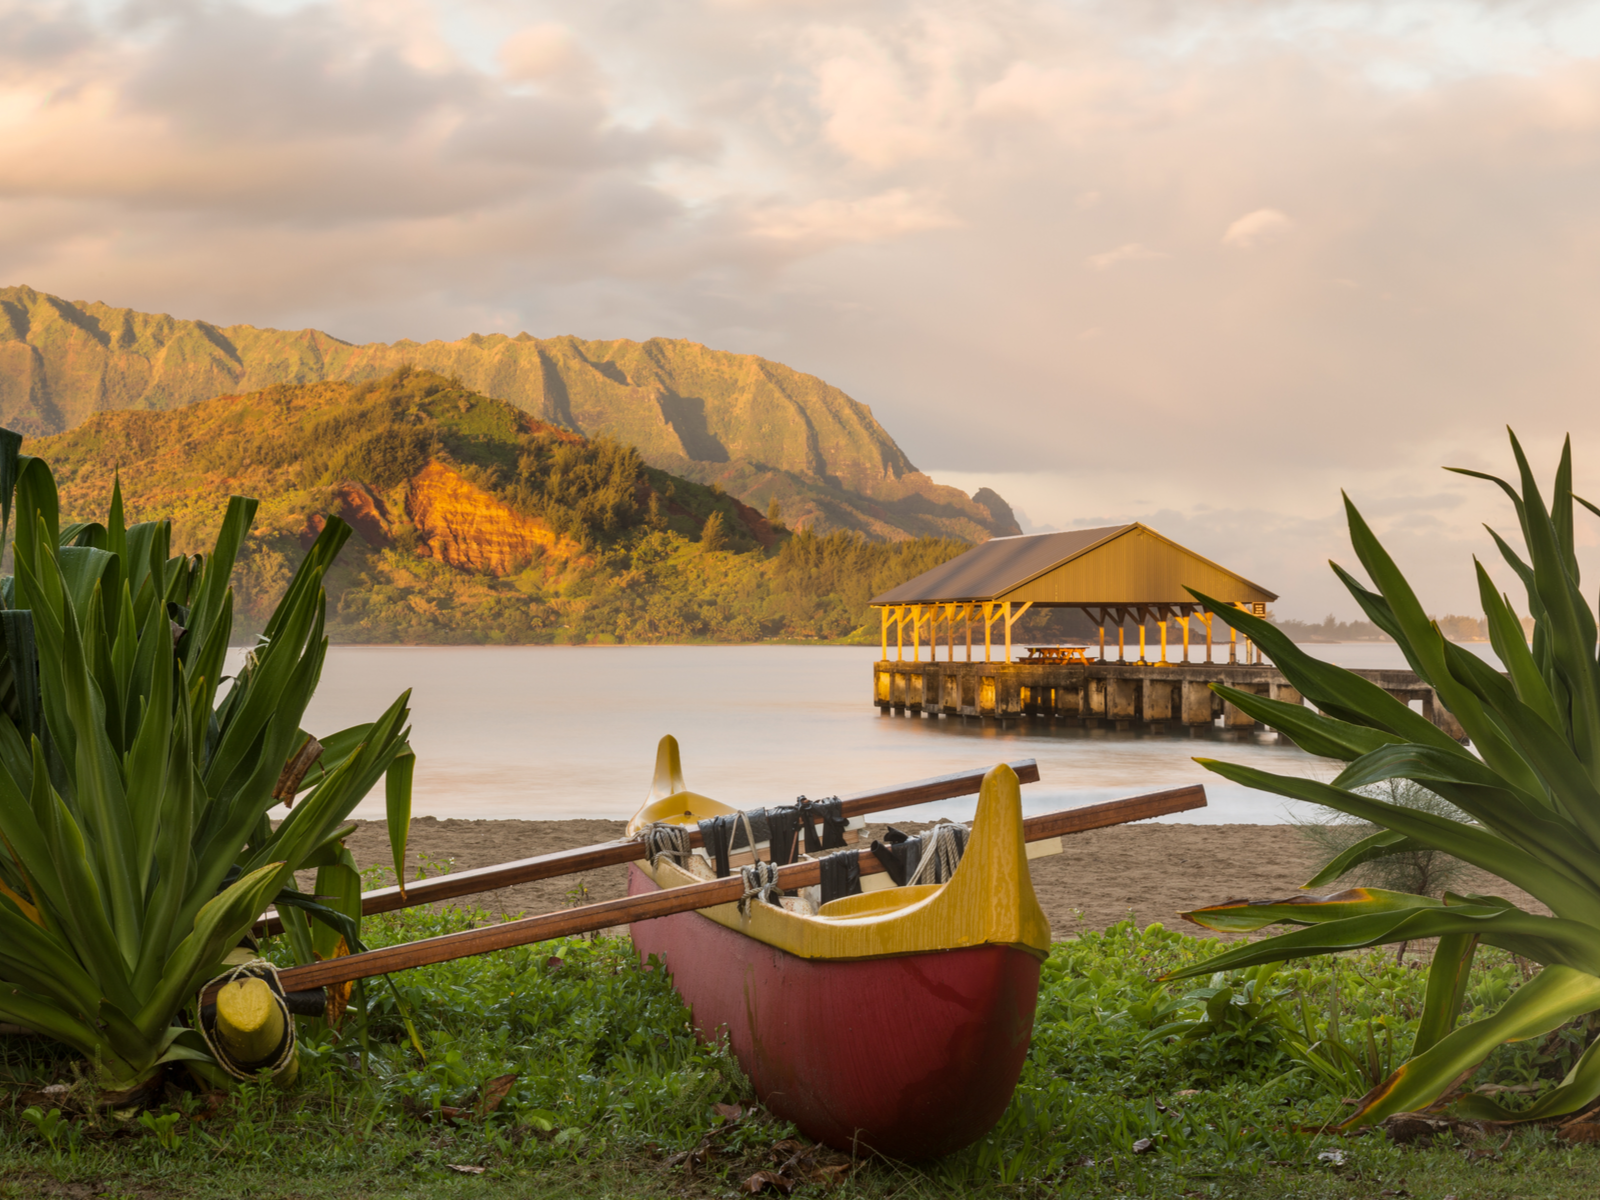 A red canoe with an outrigger on the shore and the Hanalei pier on an early morning at Hanalei Bay Beach, considered one of the best beaches in Kauai